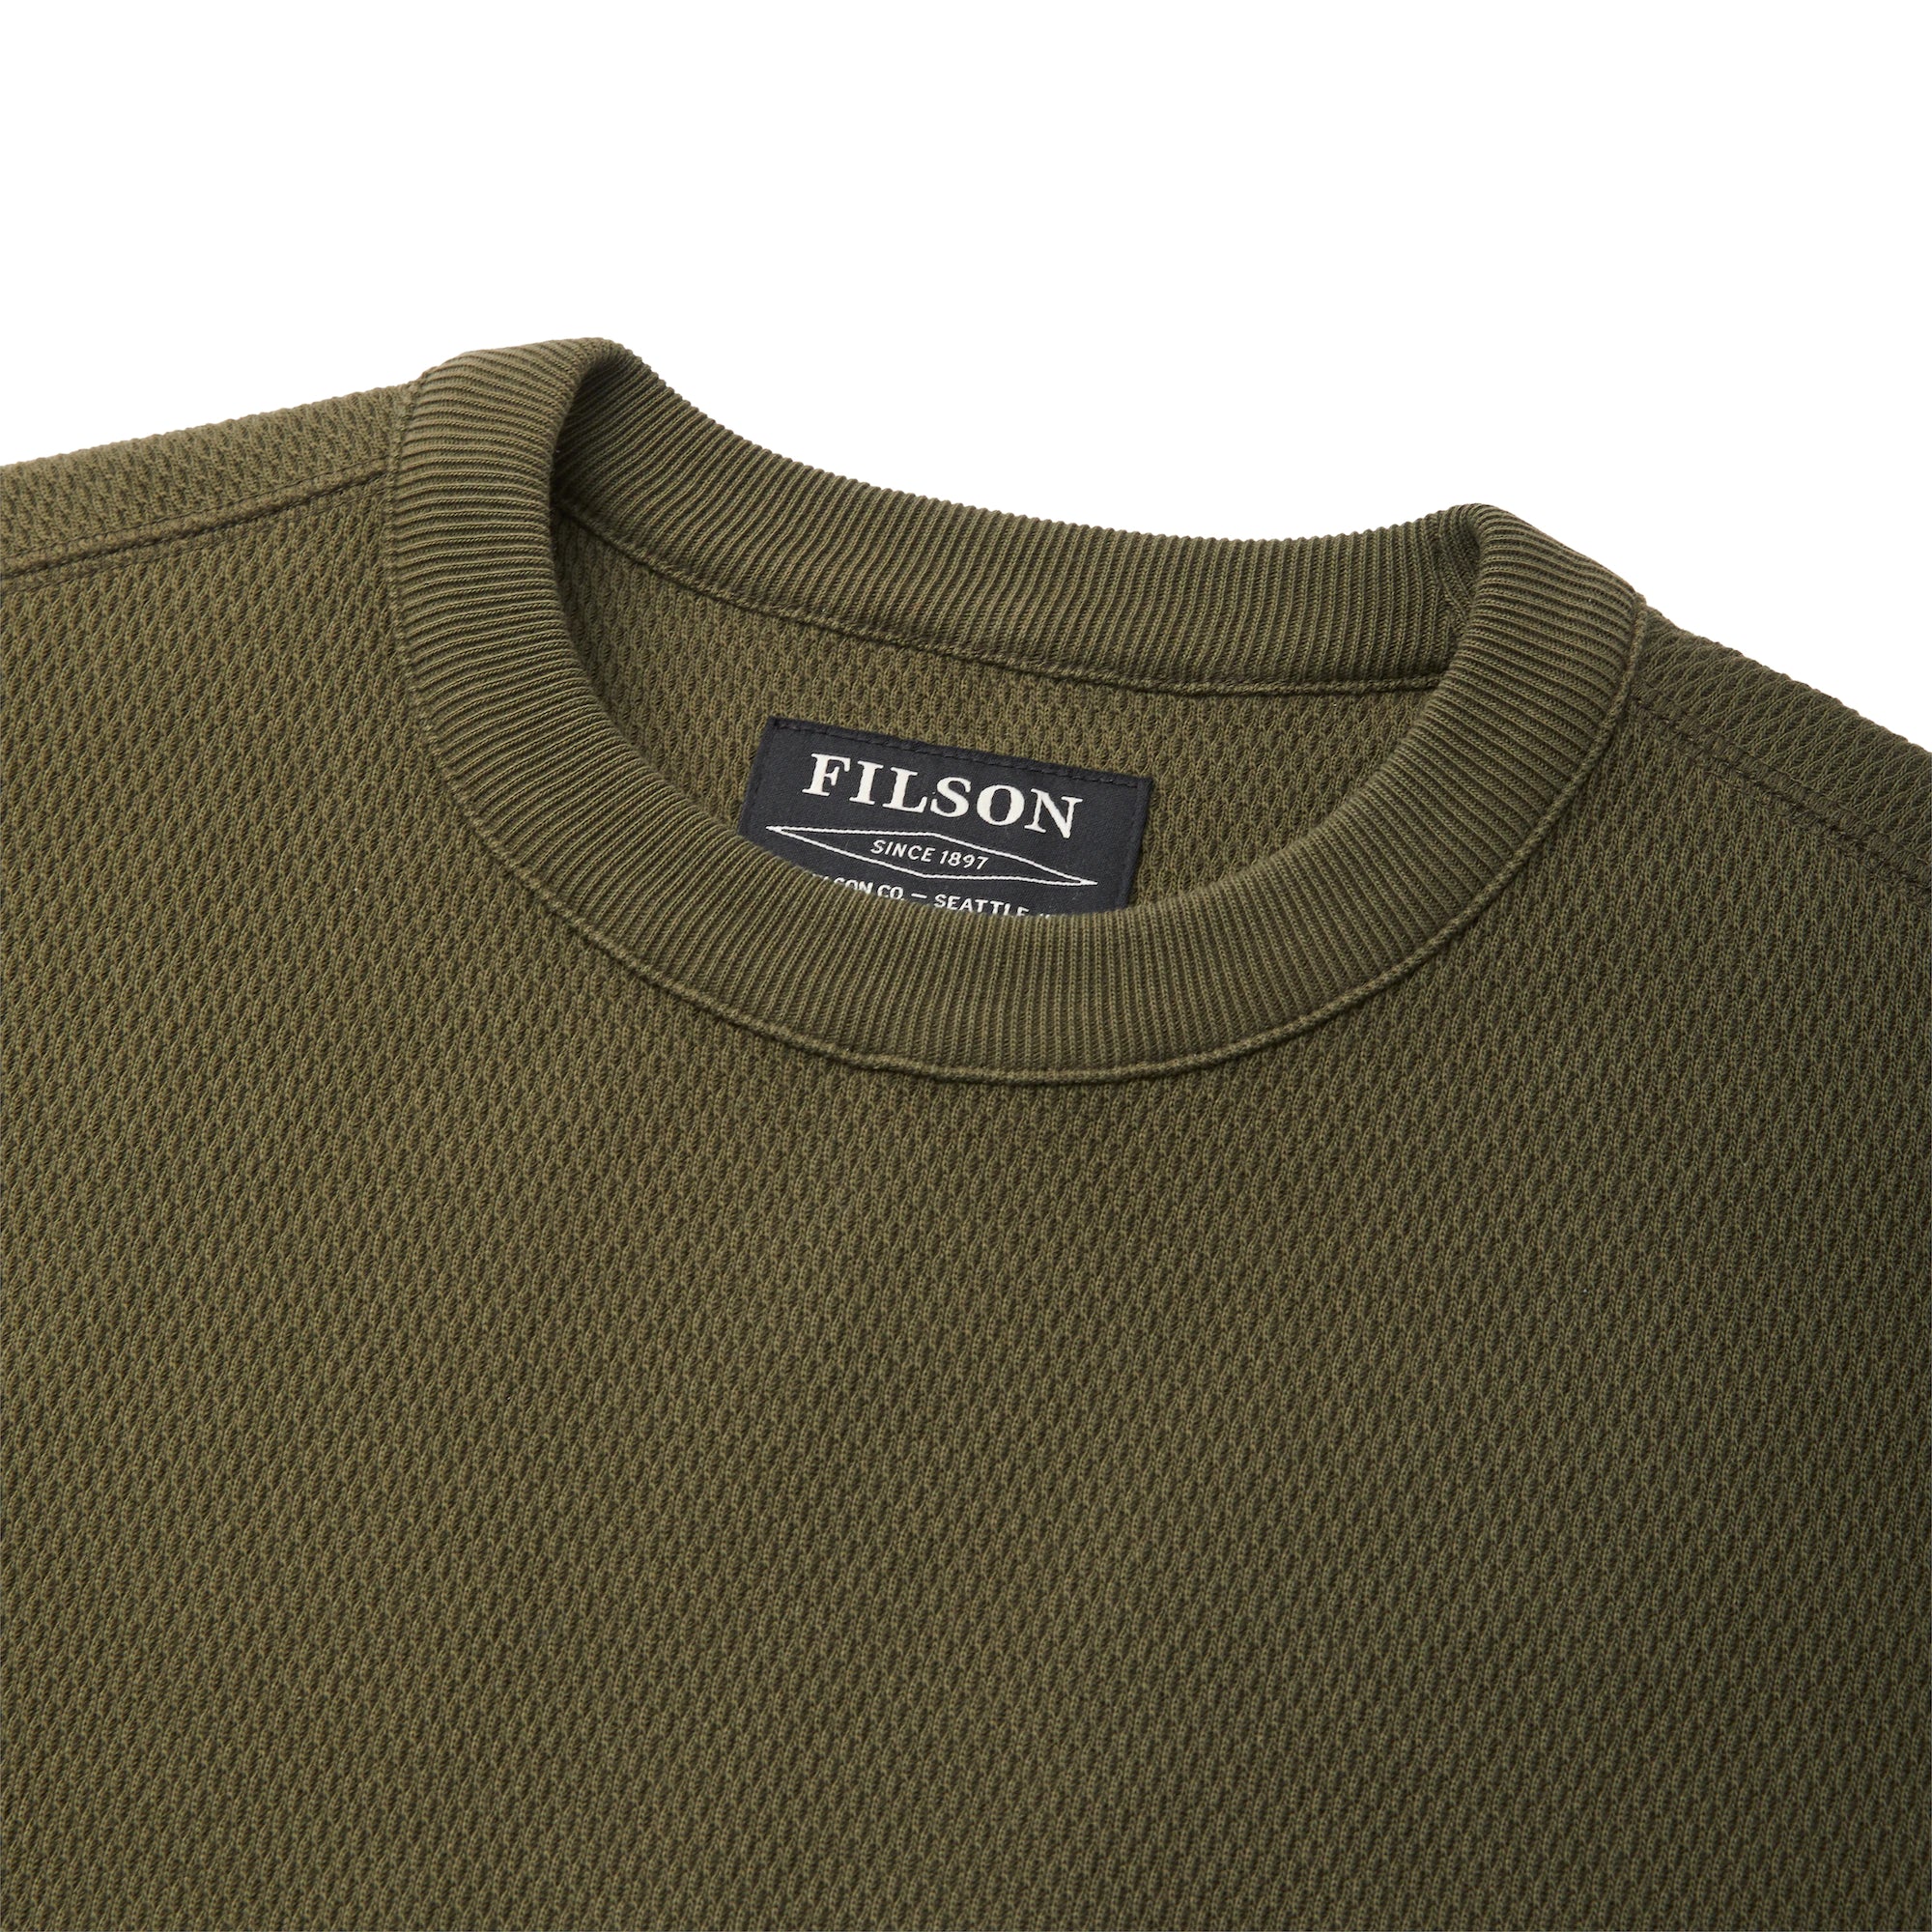 Waffle Knit Thermal Crew "Mossy Rock"